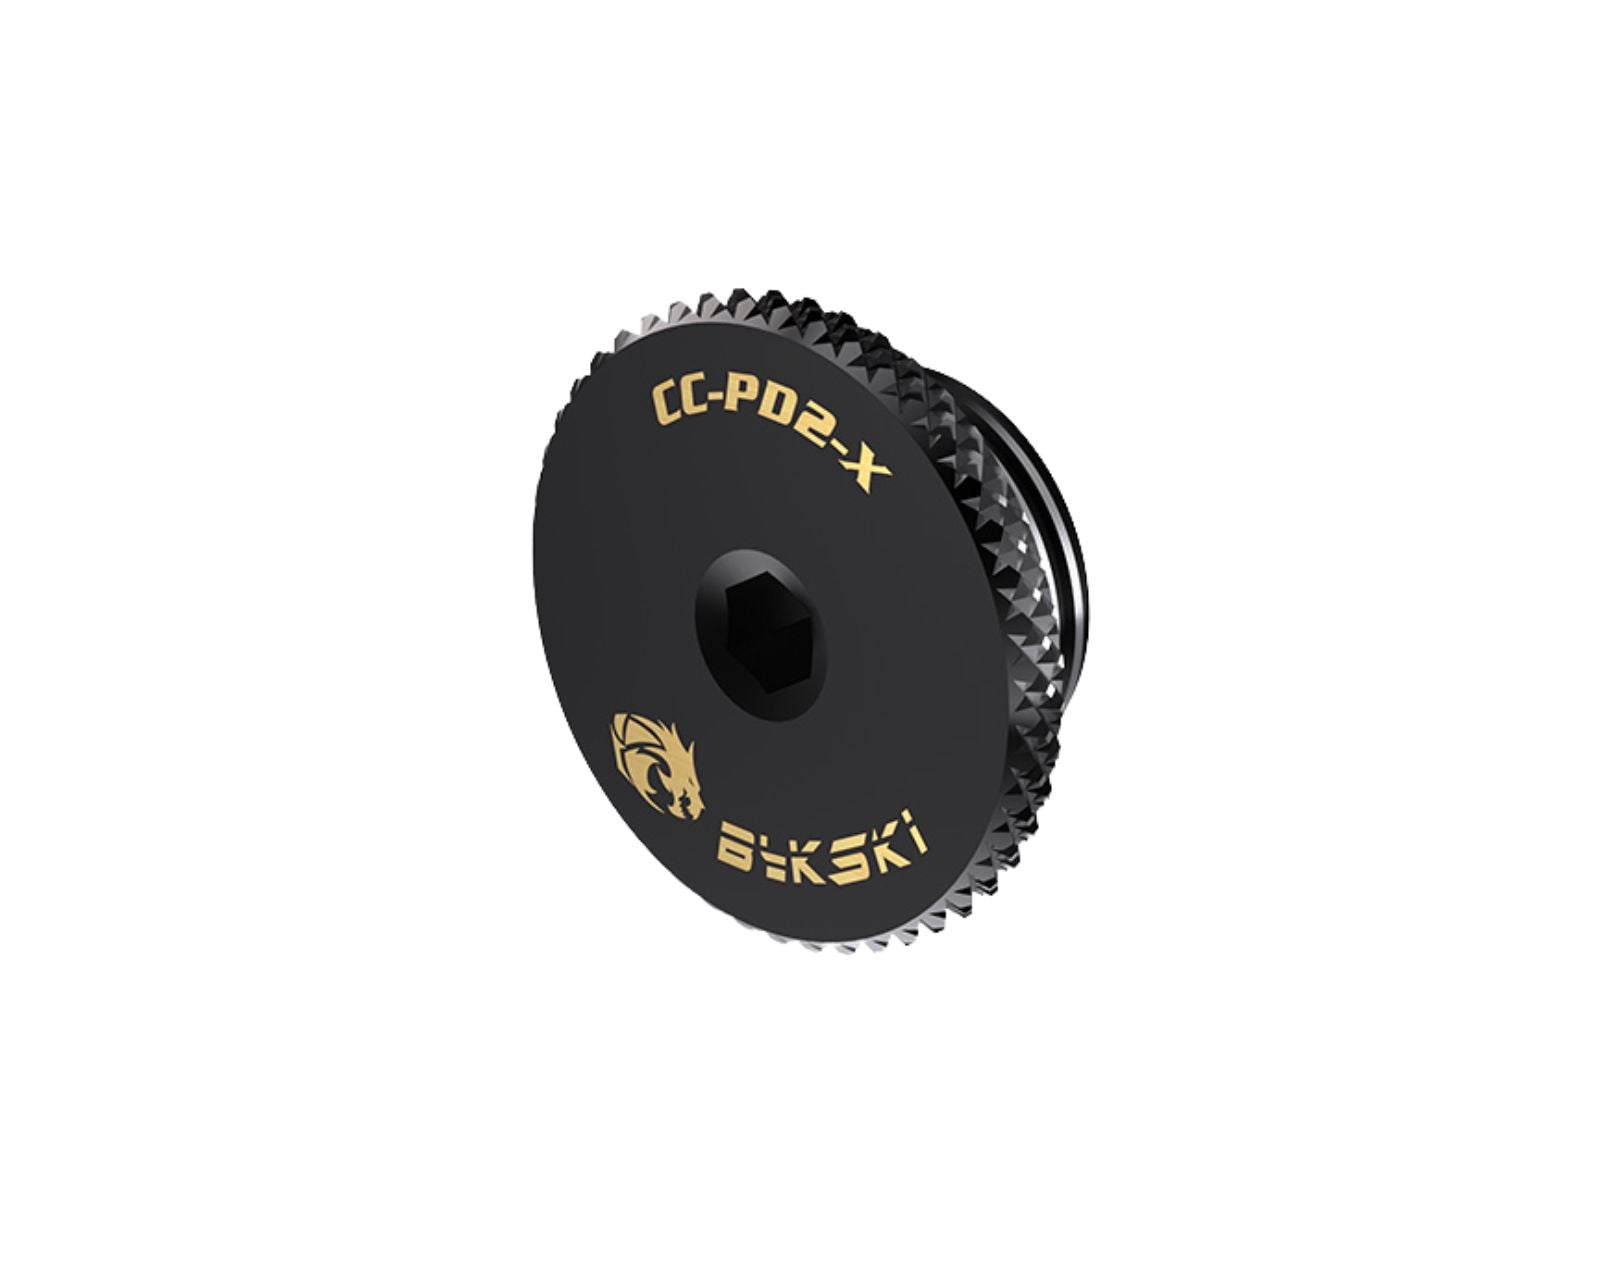 Bykski G 1/4in. Low Profile Knurled Hex Stop Fitting (CC-PD2-X) - Black